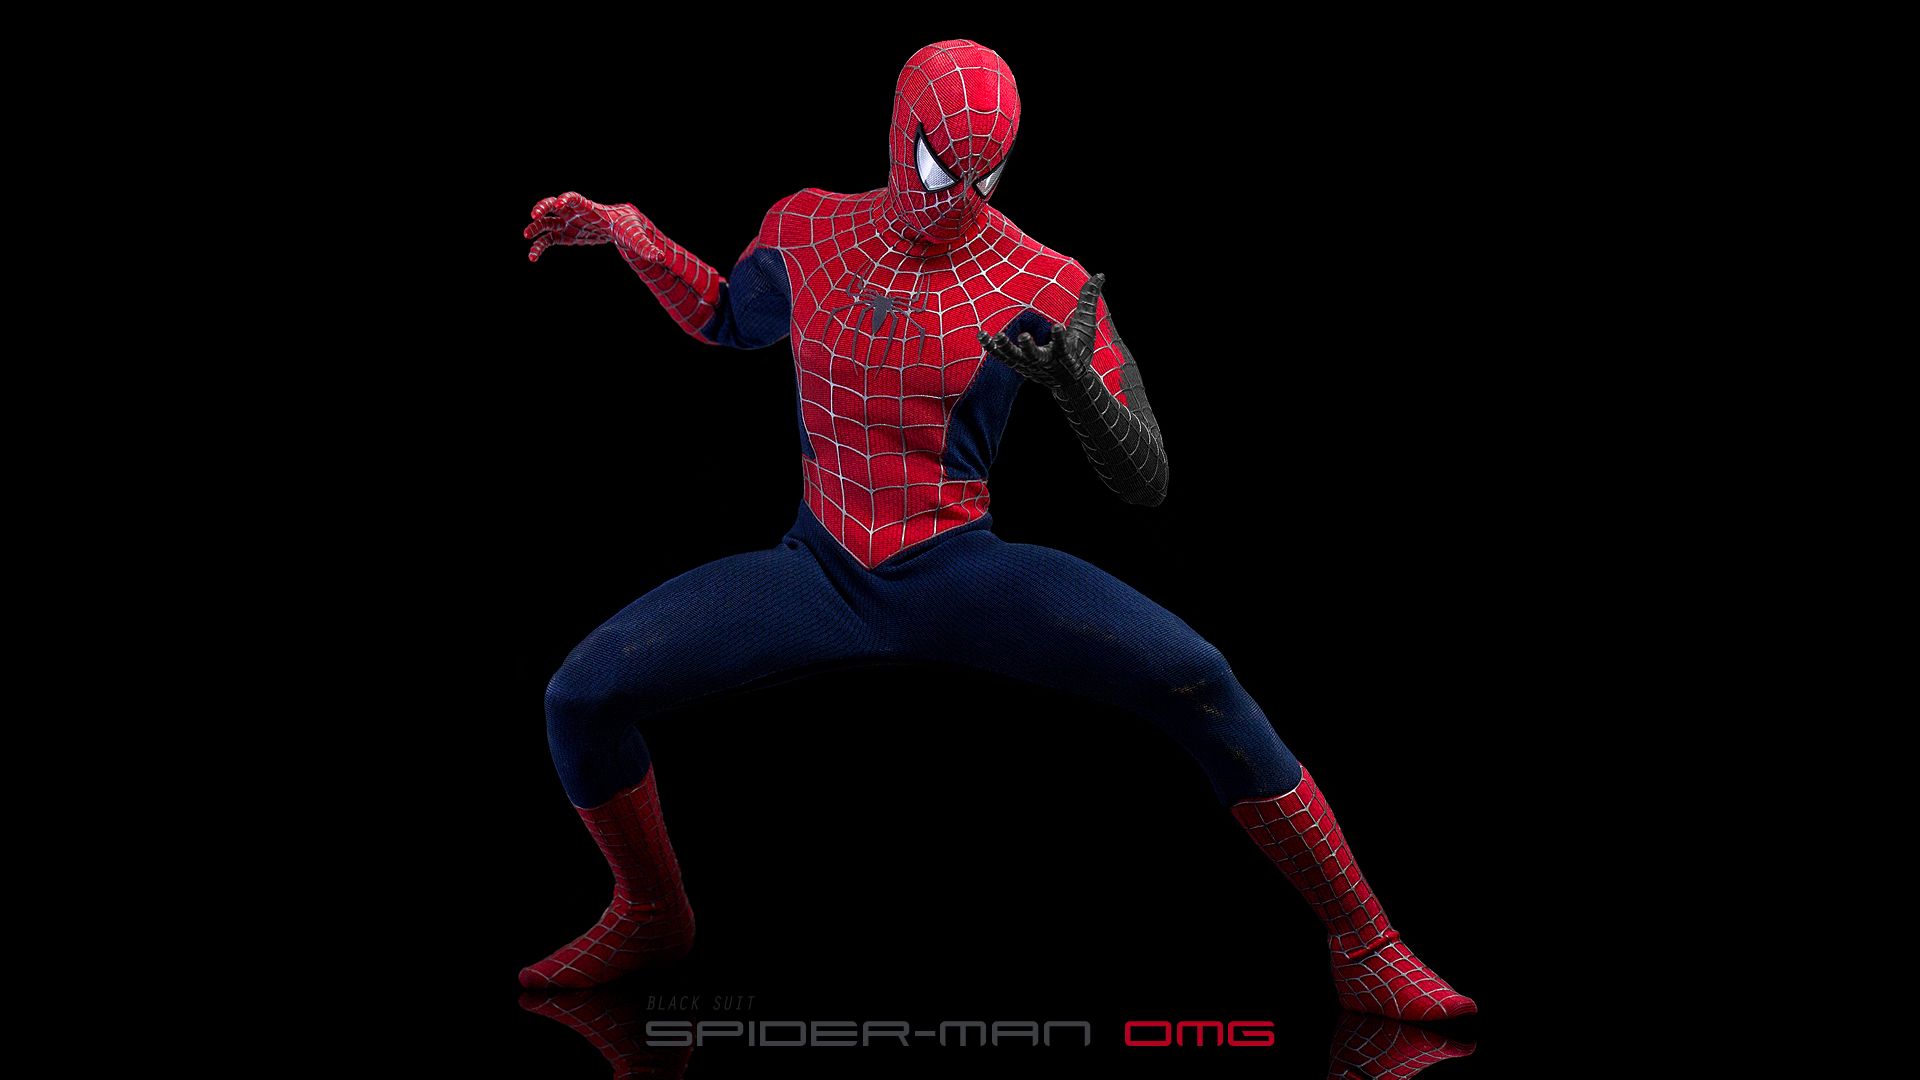 OMG's photo review Hot Toys Black-suit Spider-man | Collector Freaks  Collectibles Forum